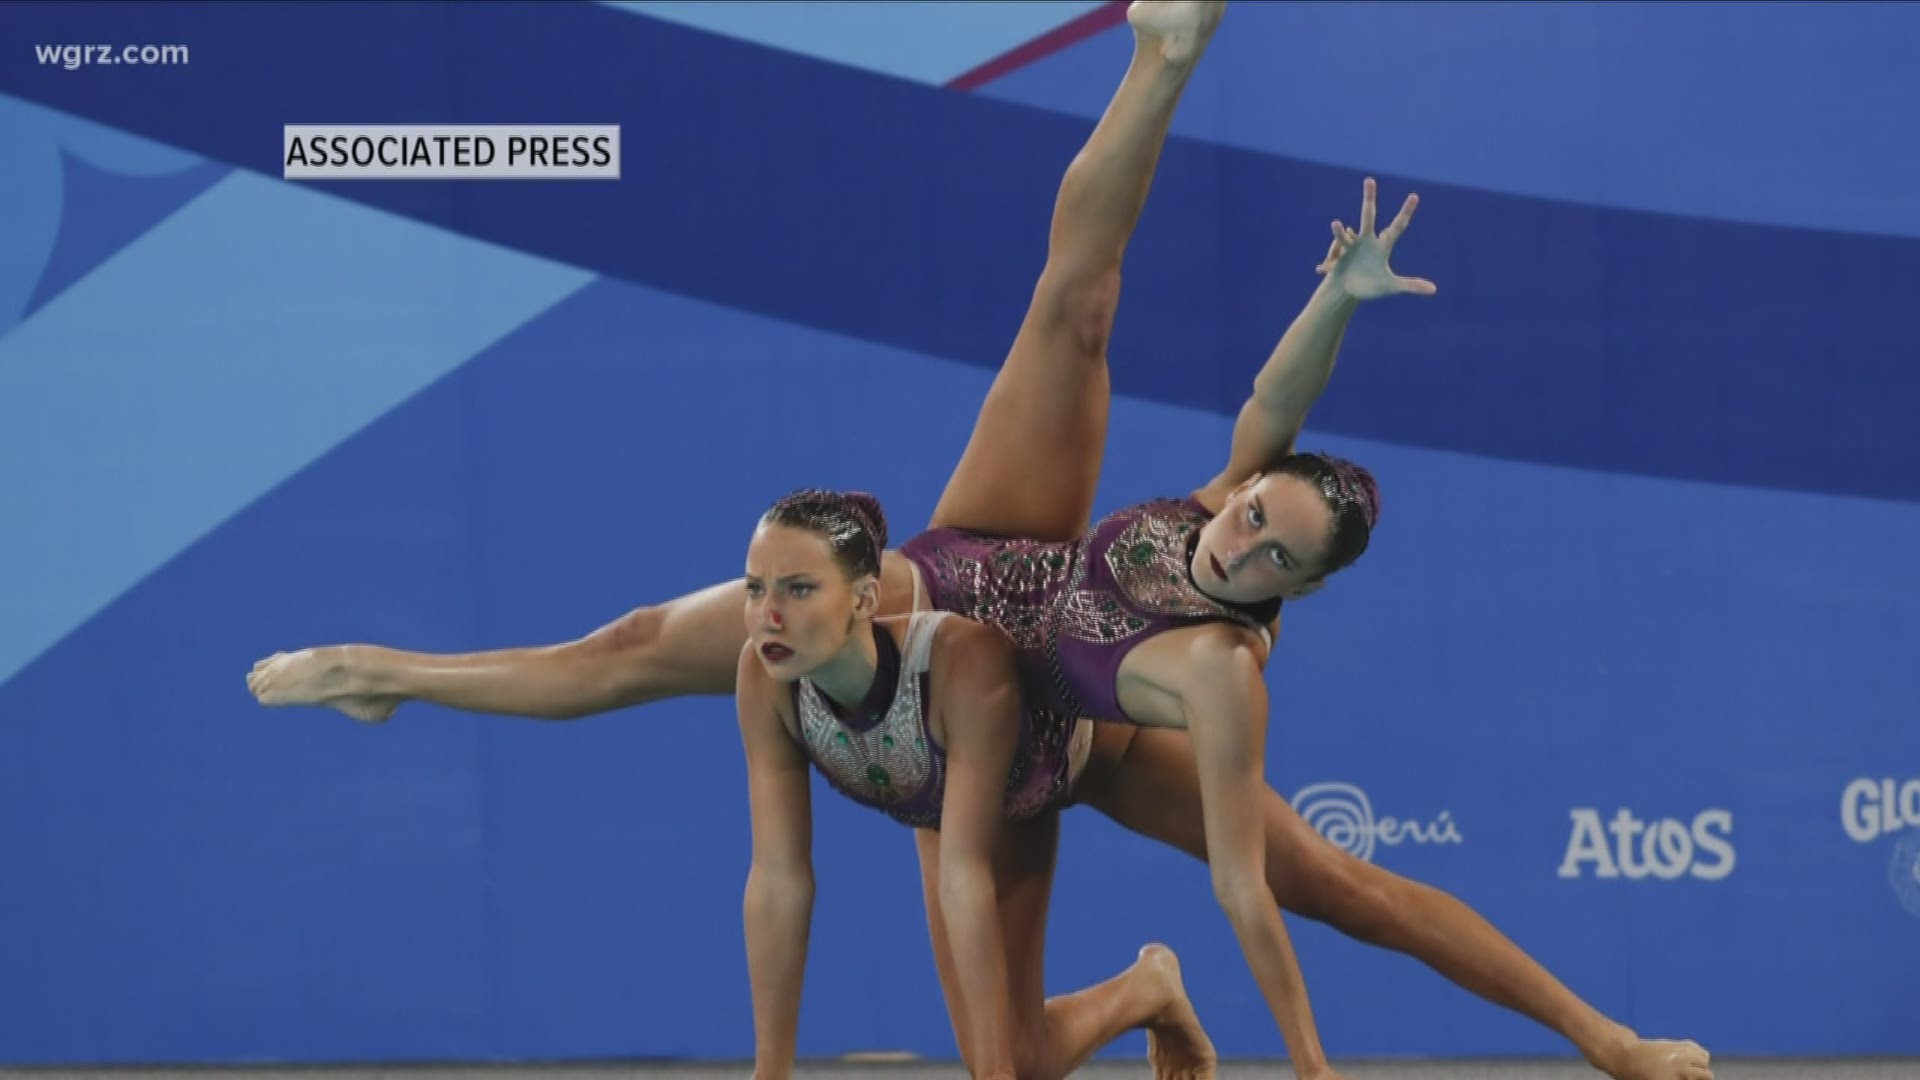 The synchronized swimmer won bronze in both the duet and group competitions.